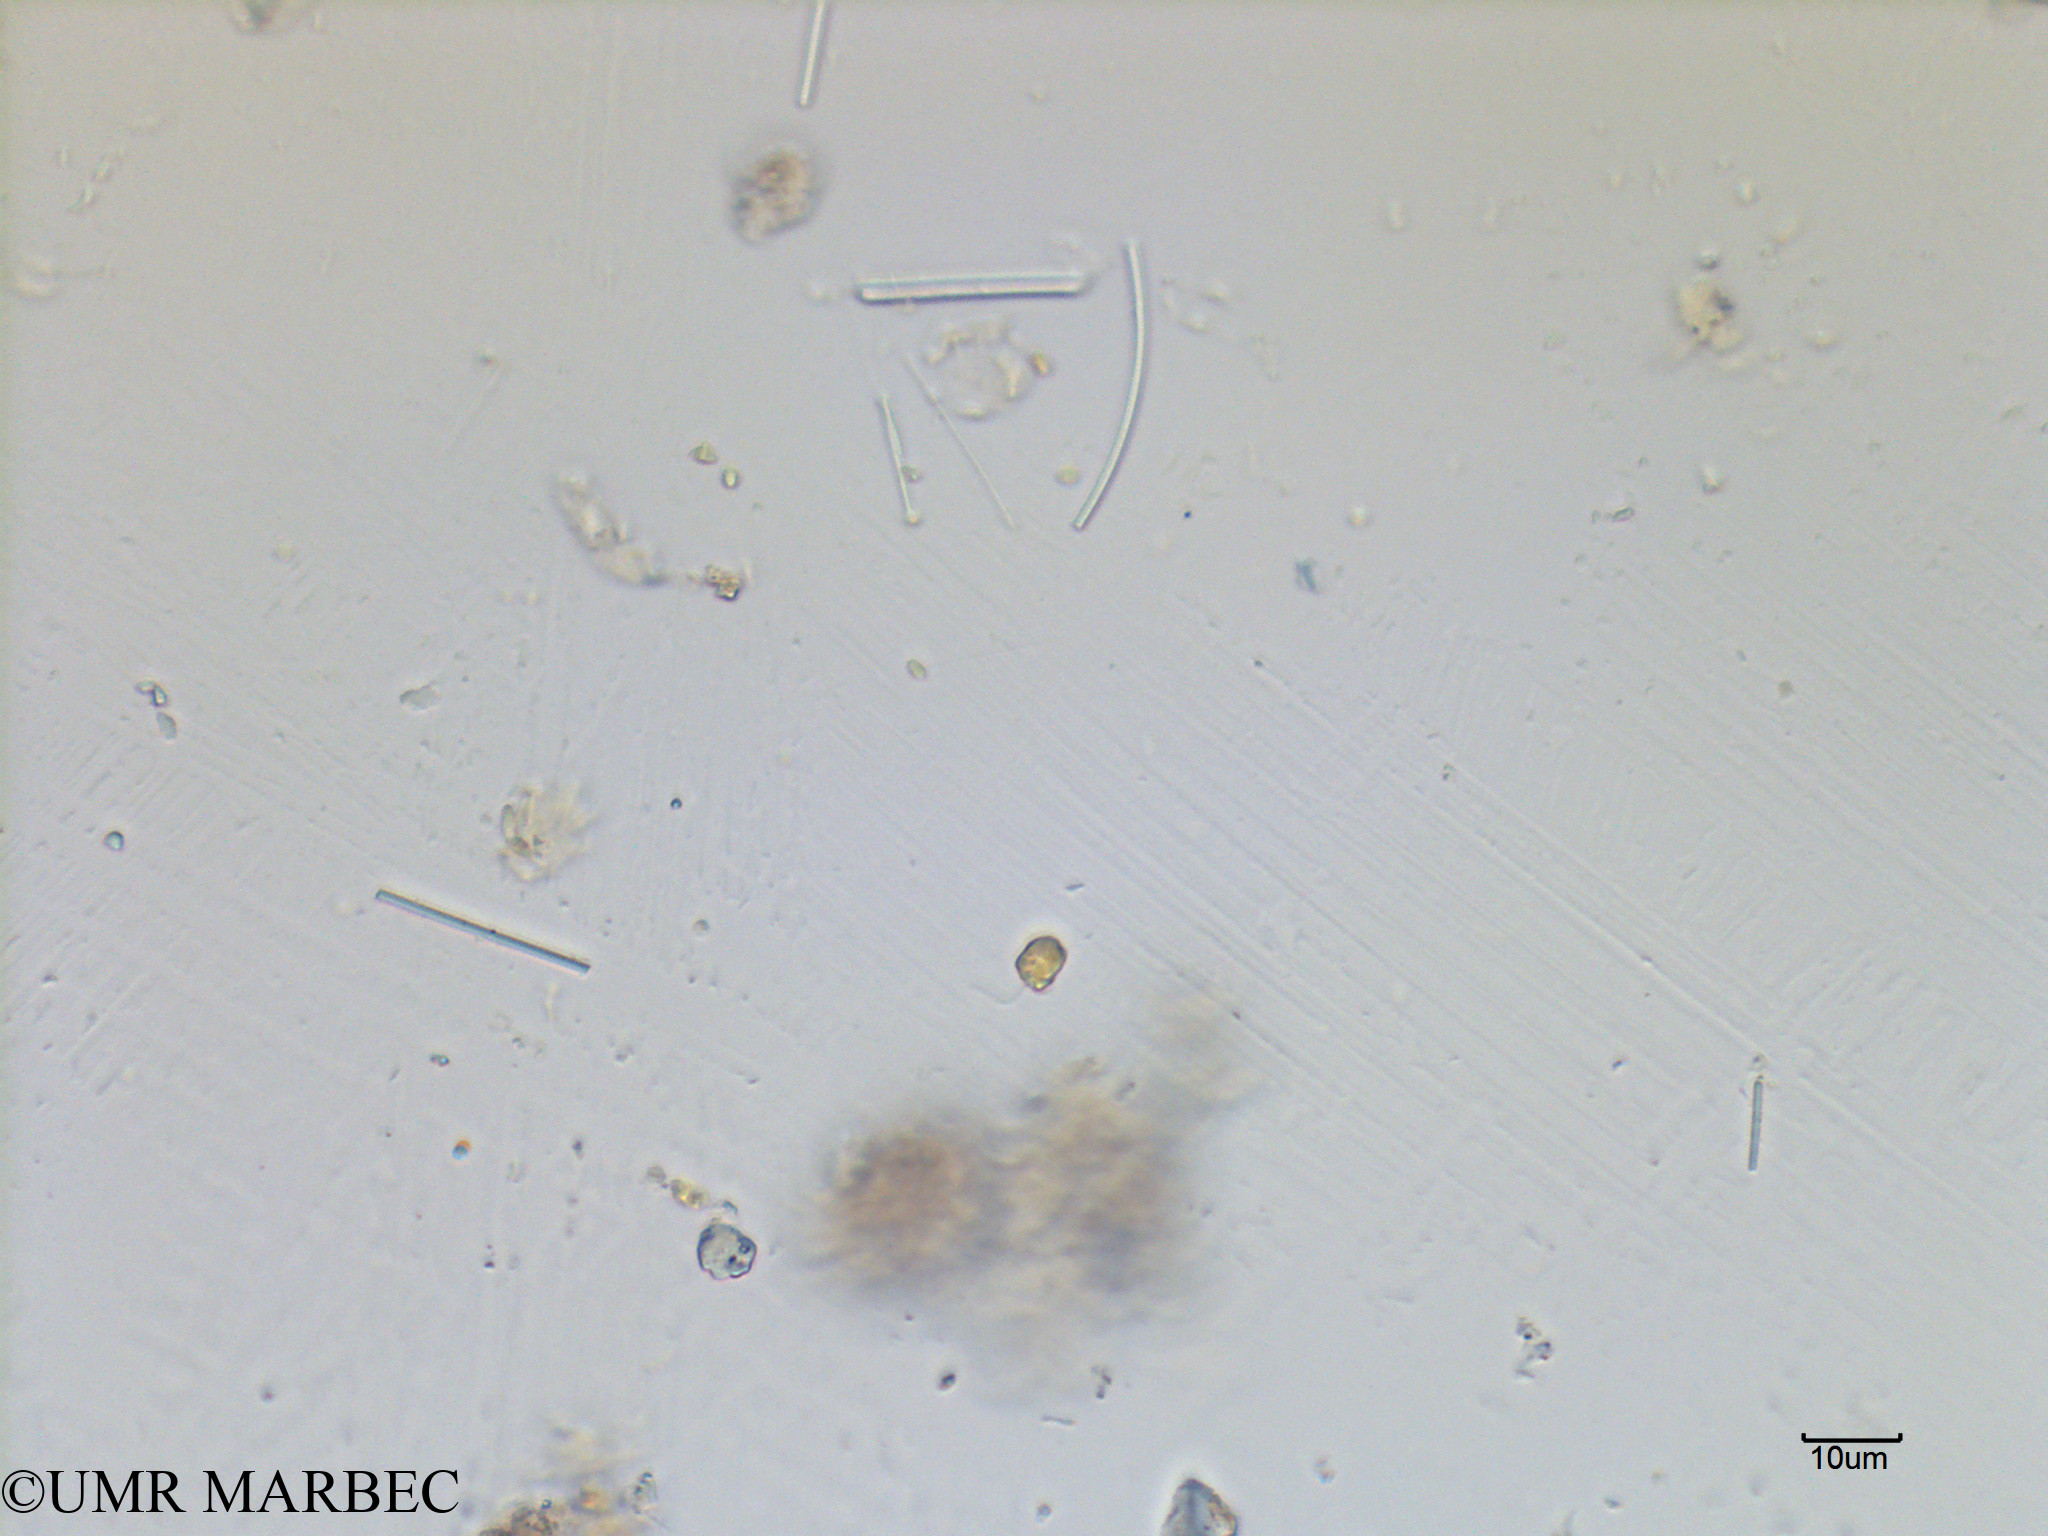 phyto/Scattered_Islands/mayotte_lagoon/SIREME May 2016/Nanoflagellé 9 (MAY8_microflagelle 8-2).tif(copy).jpg